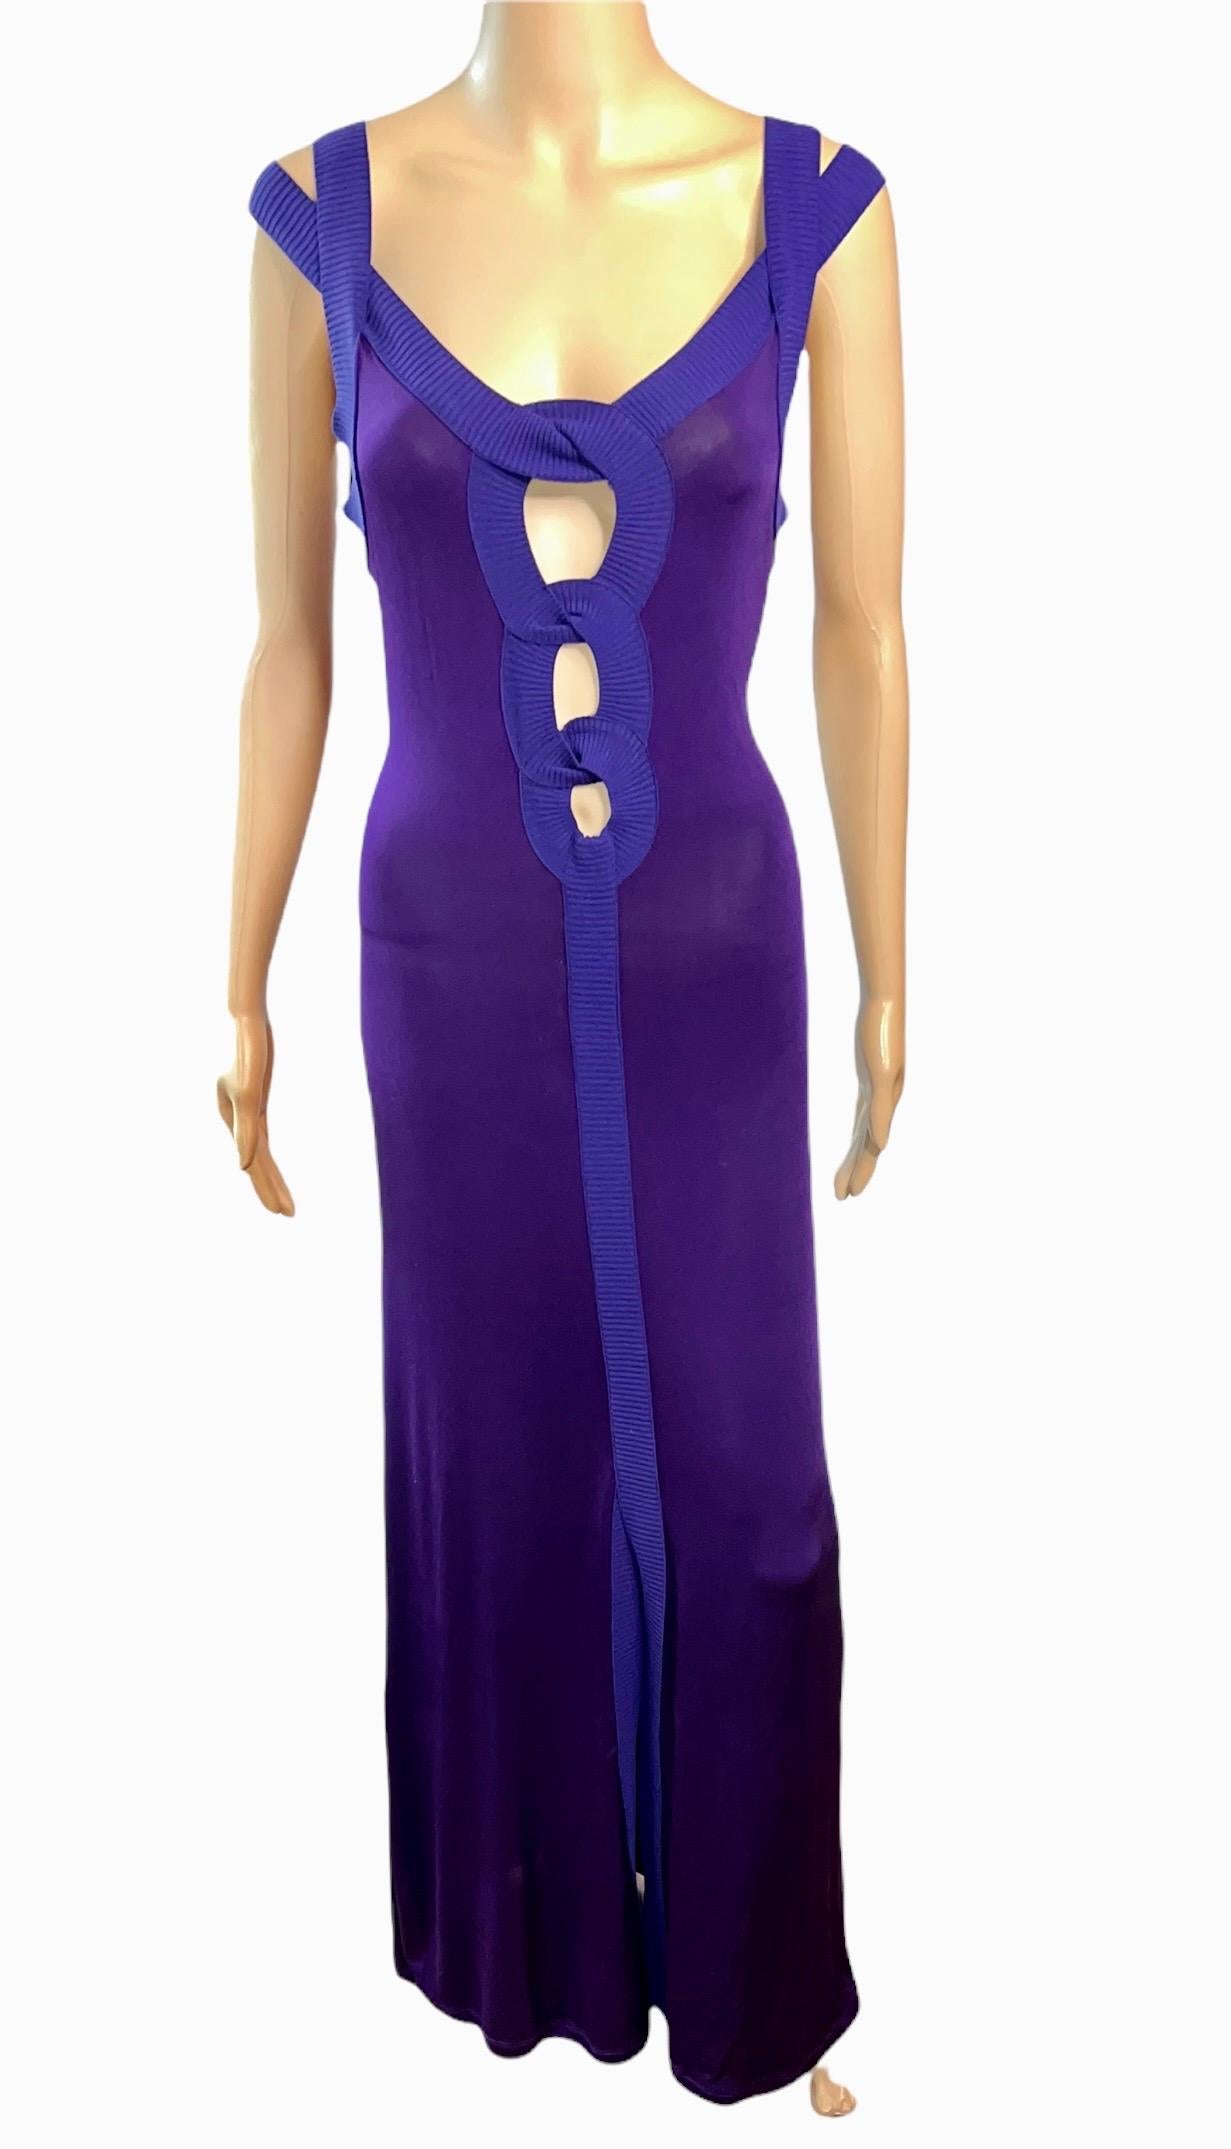 Jean Paul Gaultier S/S 2007 Cutout Bodycon Maxi Dress Size L

Please note this dress is very versatile and could be worn with the cutouts in front or back based on preference.